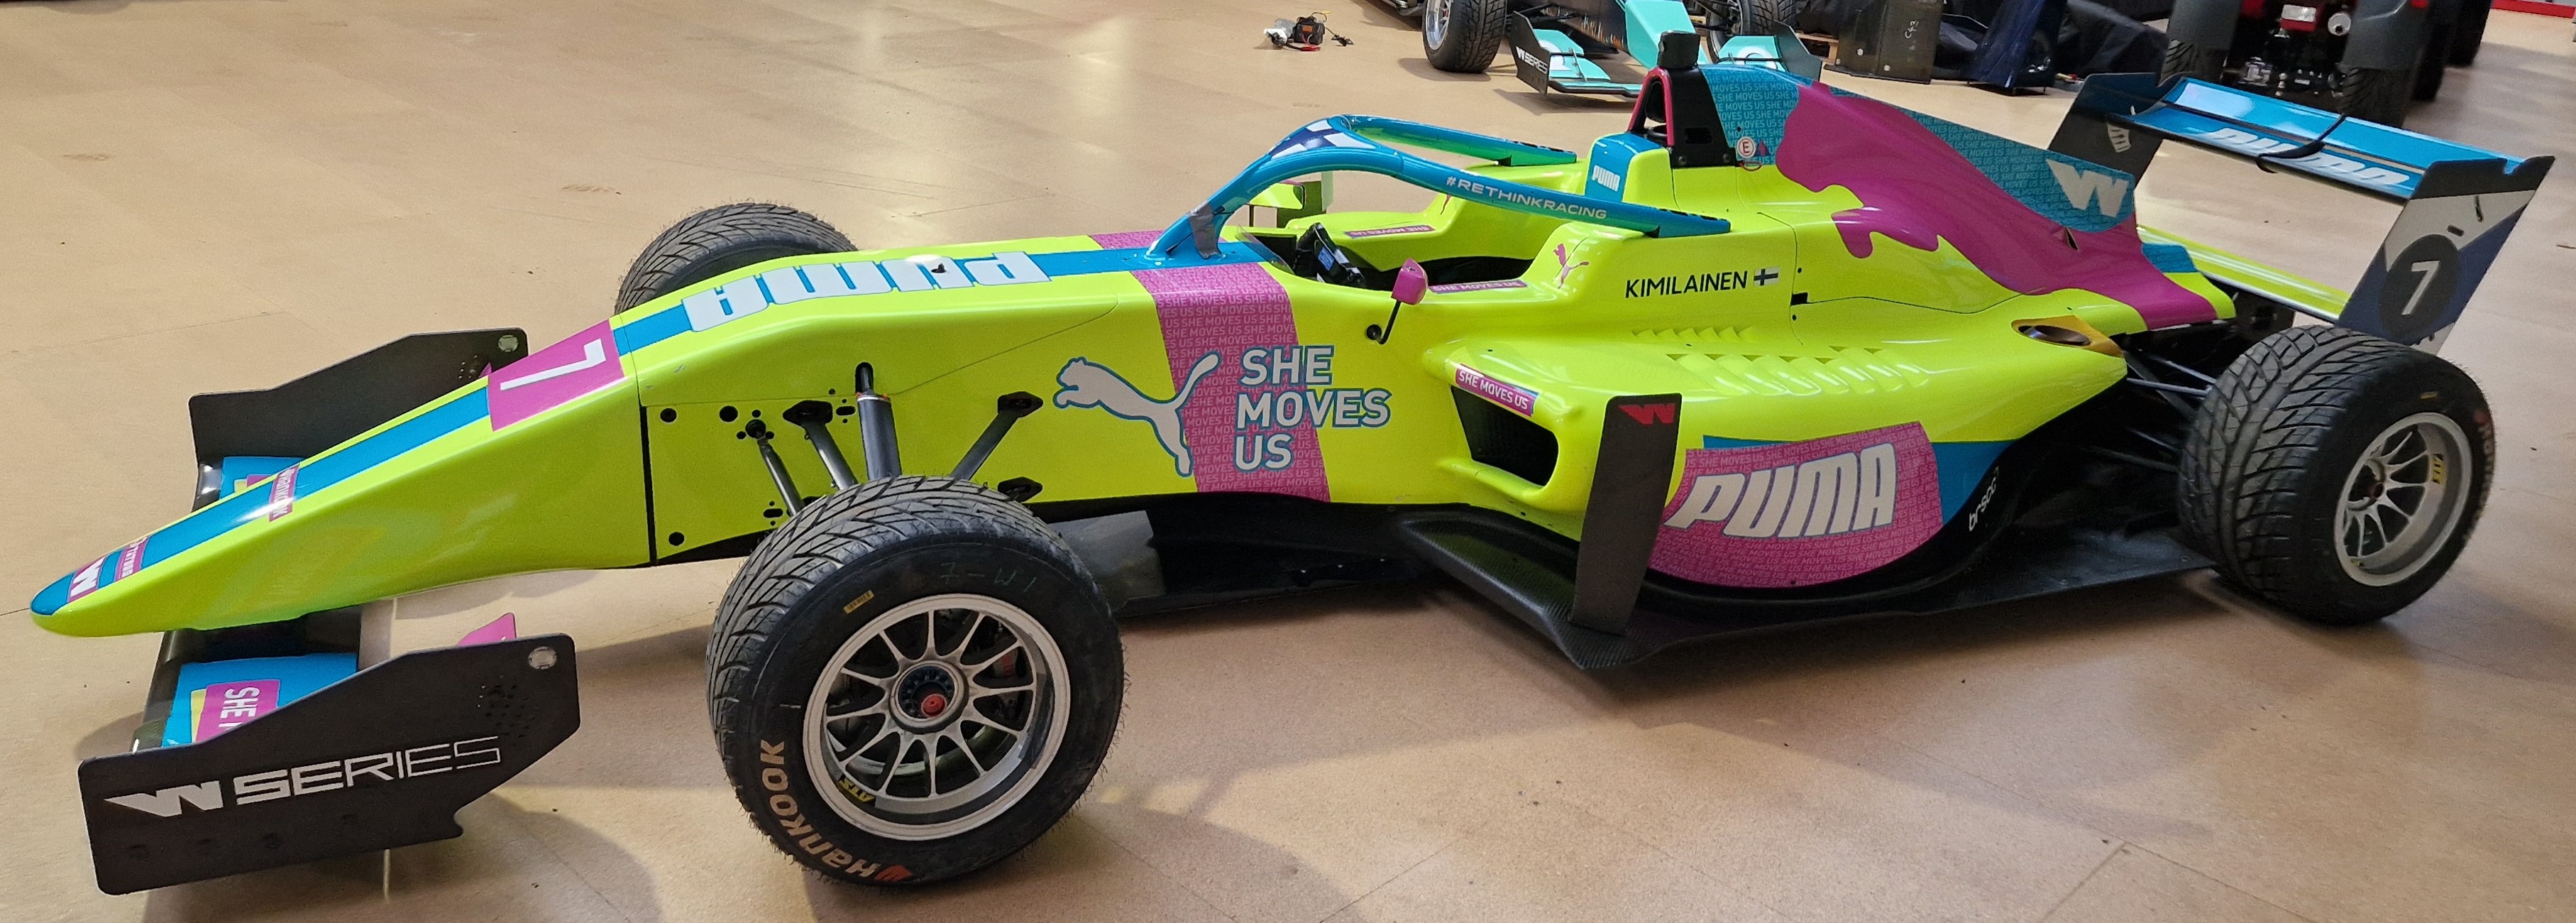 One TATUUS F3 T-318 Alfa Romeo Race Car Chassis No. 035 (2019) Finished in PUMA She Moves Us - Image 2 of 10